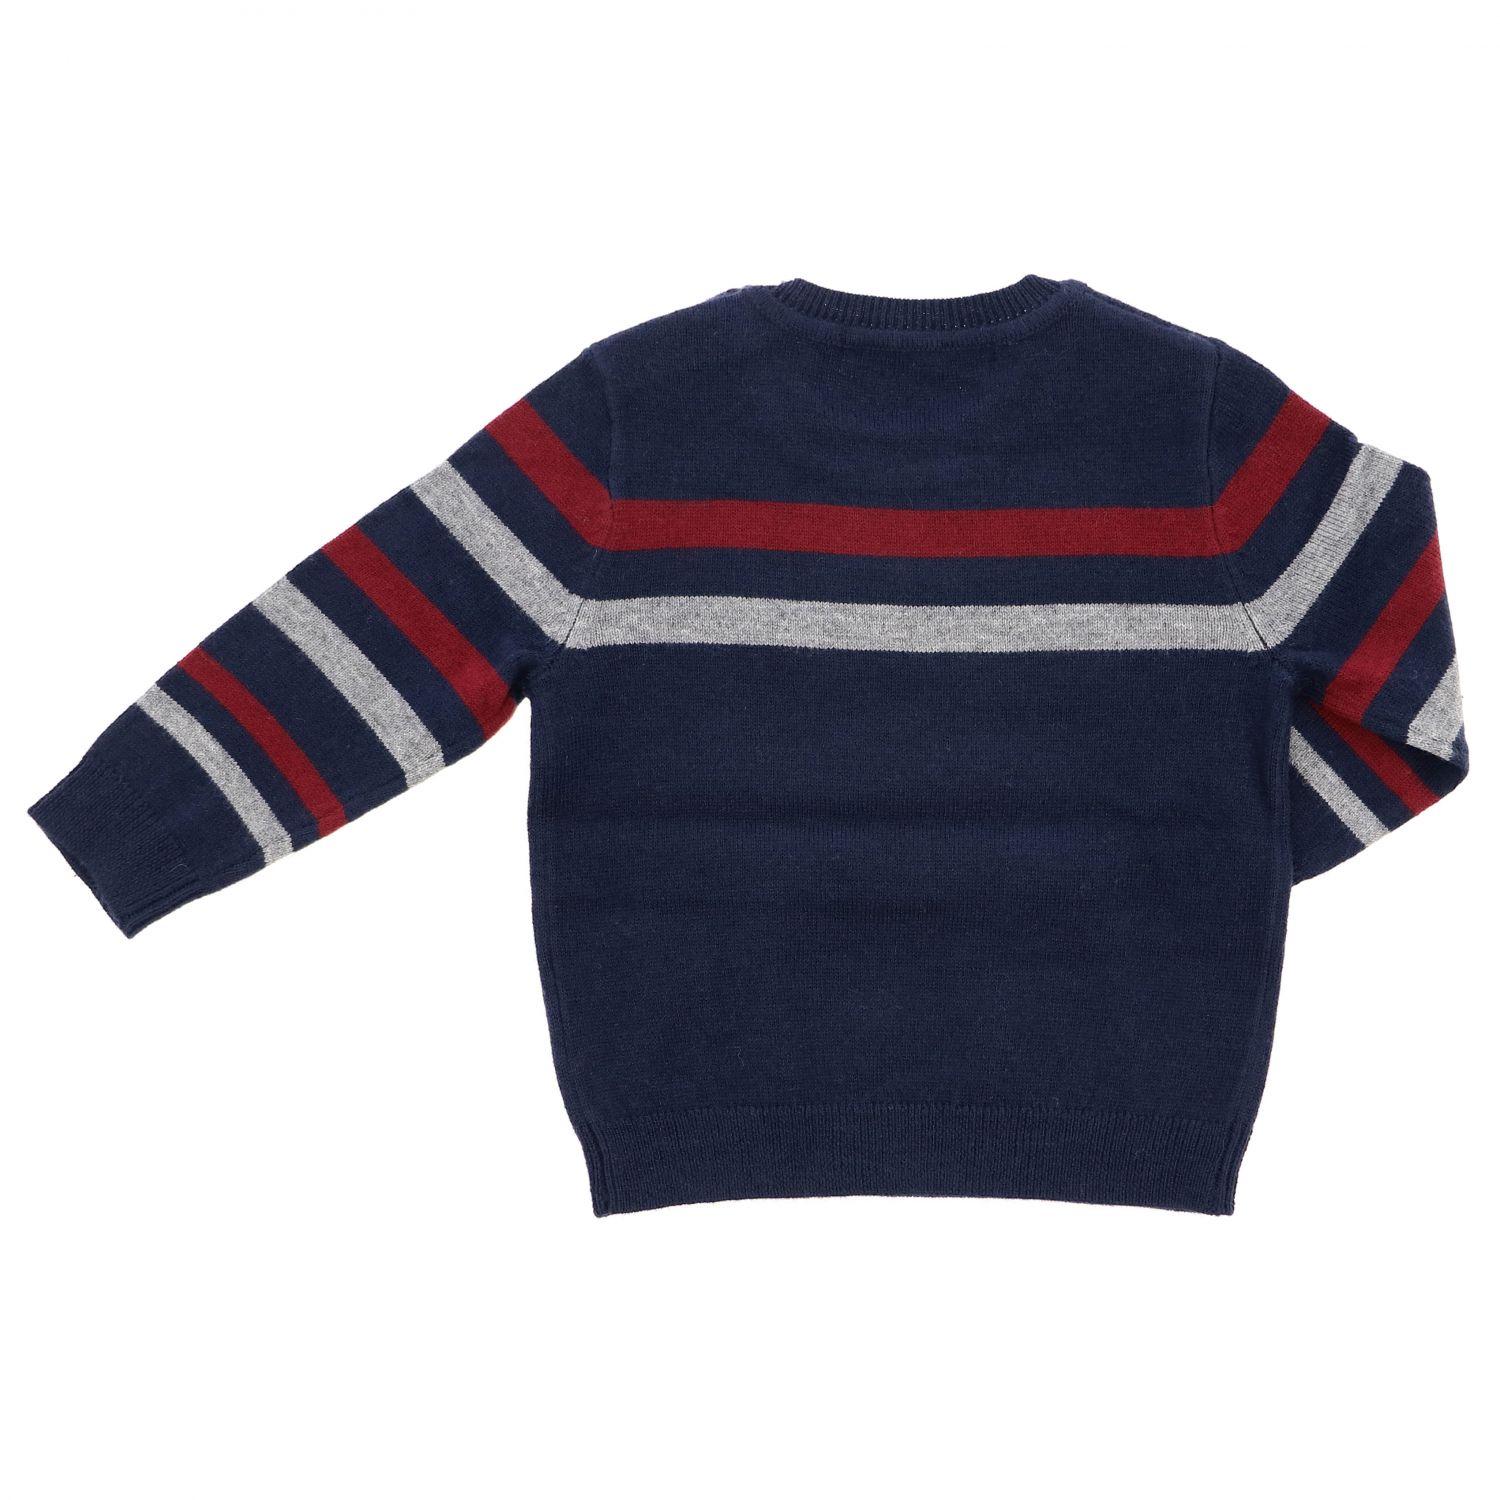 Jeckerson Outlet: sweater for baby - Navy | Jeckerson sweater JN1453 ...